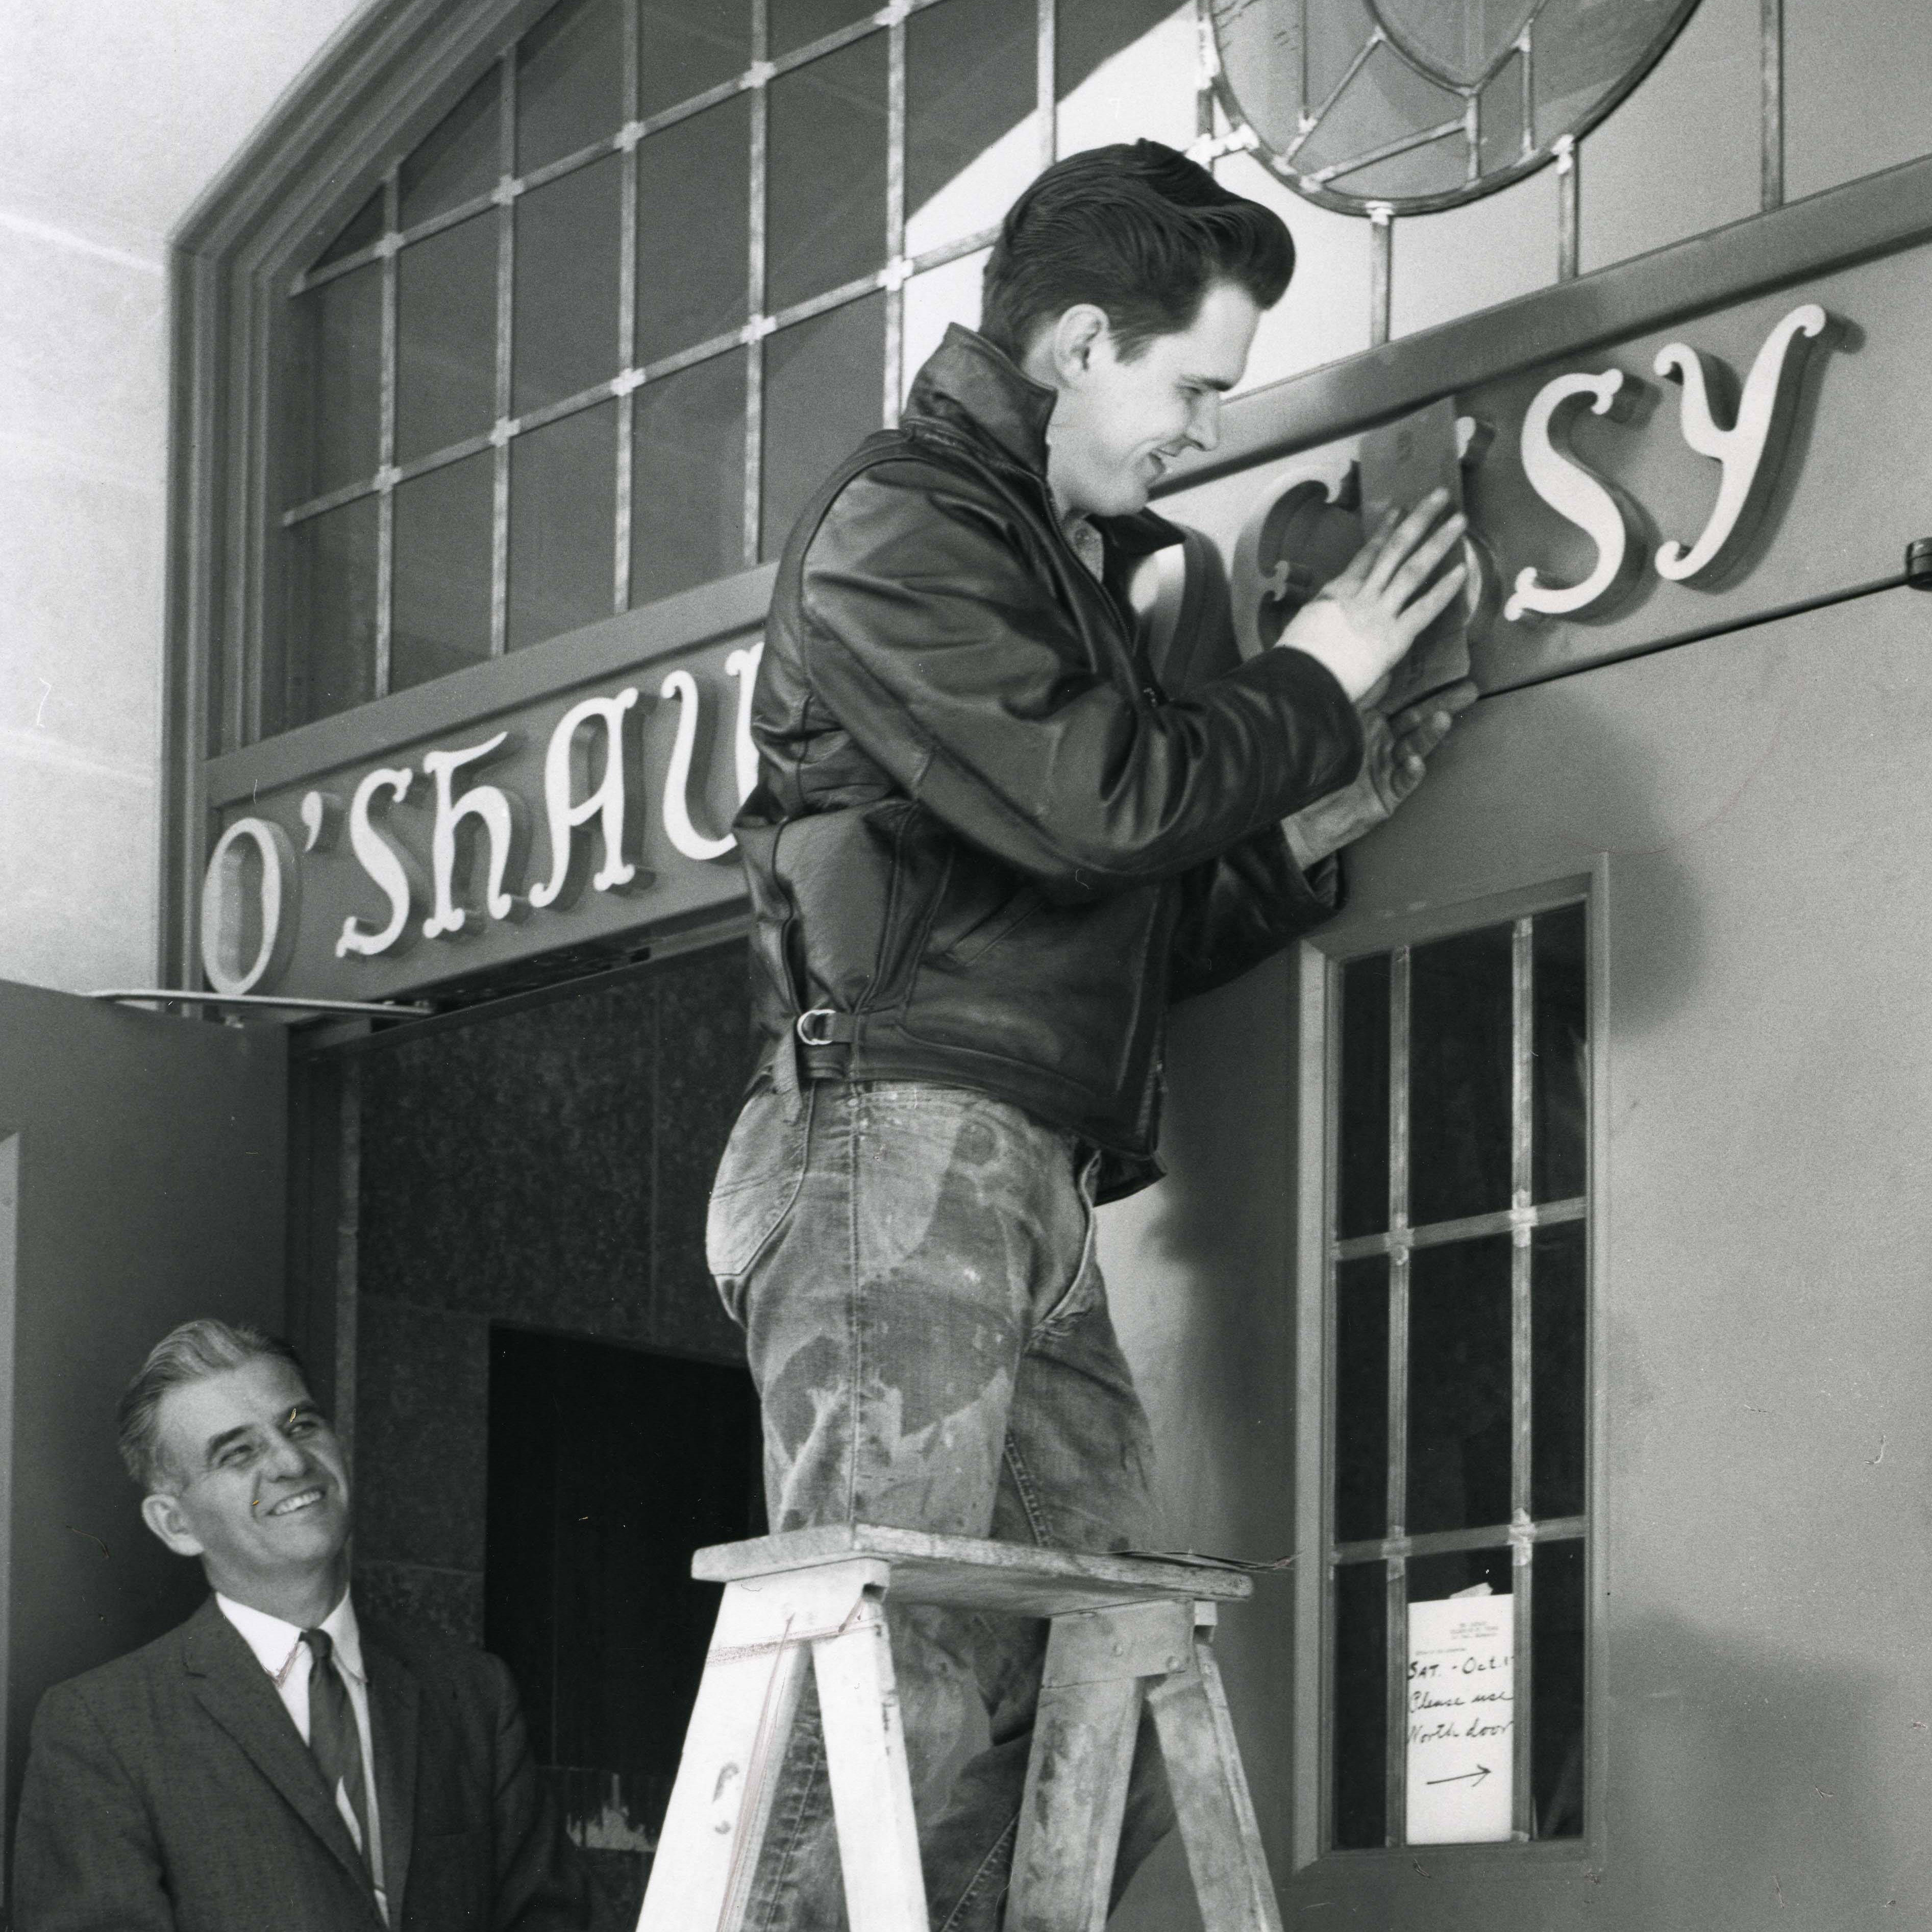 Archival photo of a man hanging the O’Shaughnessy signage